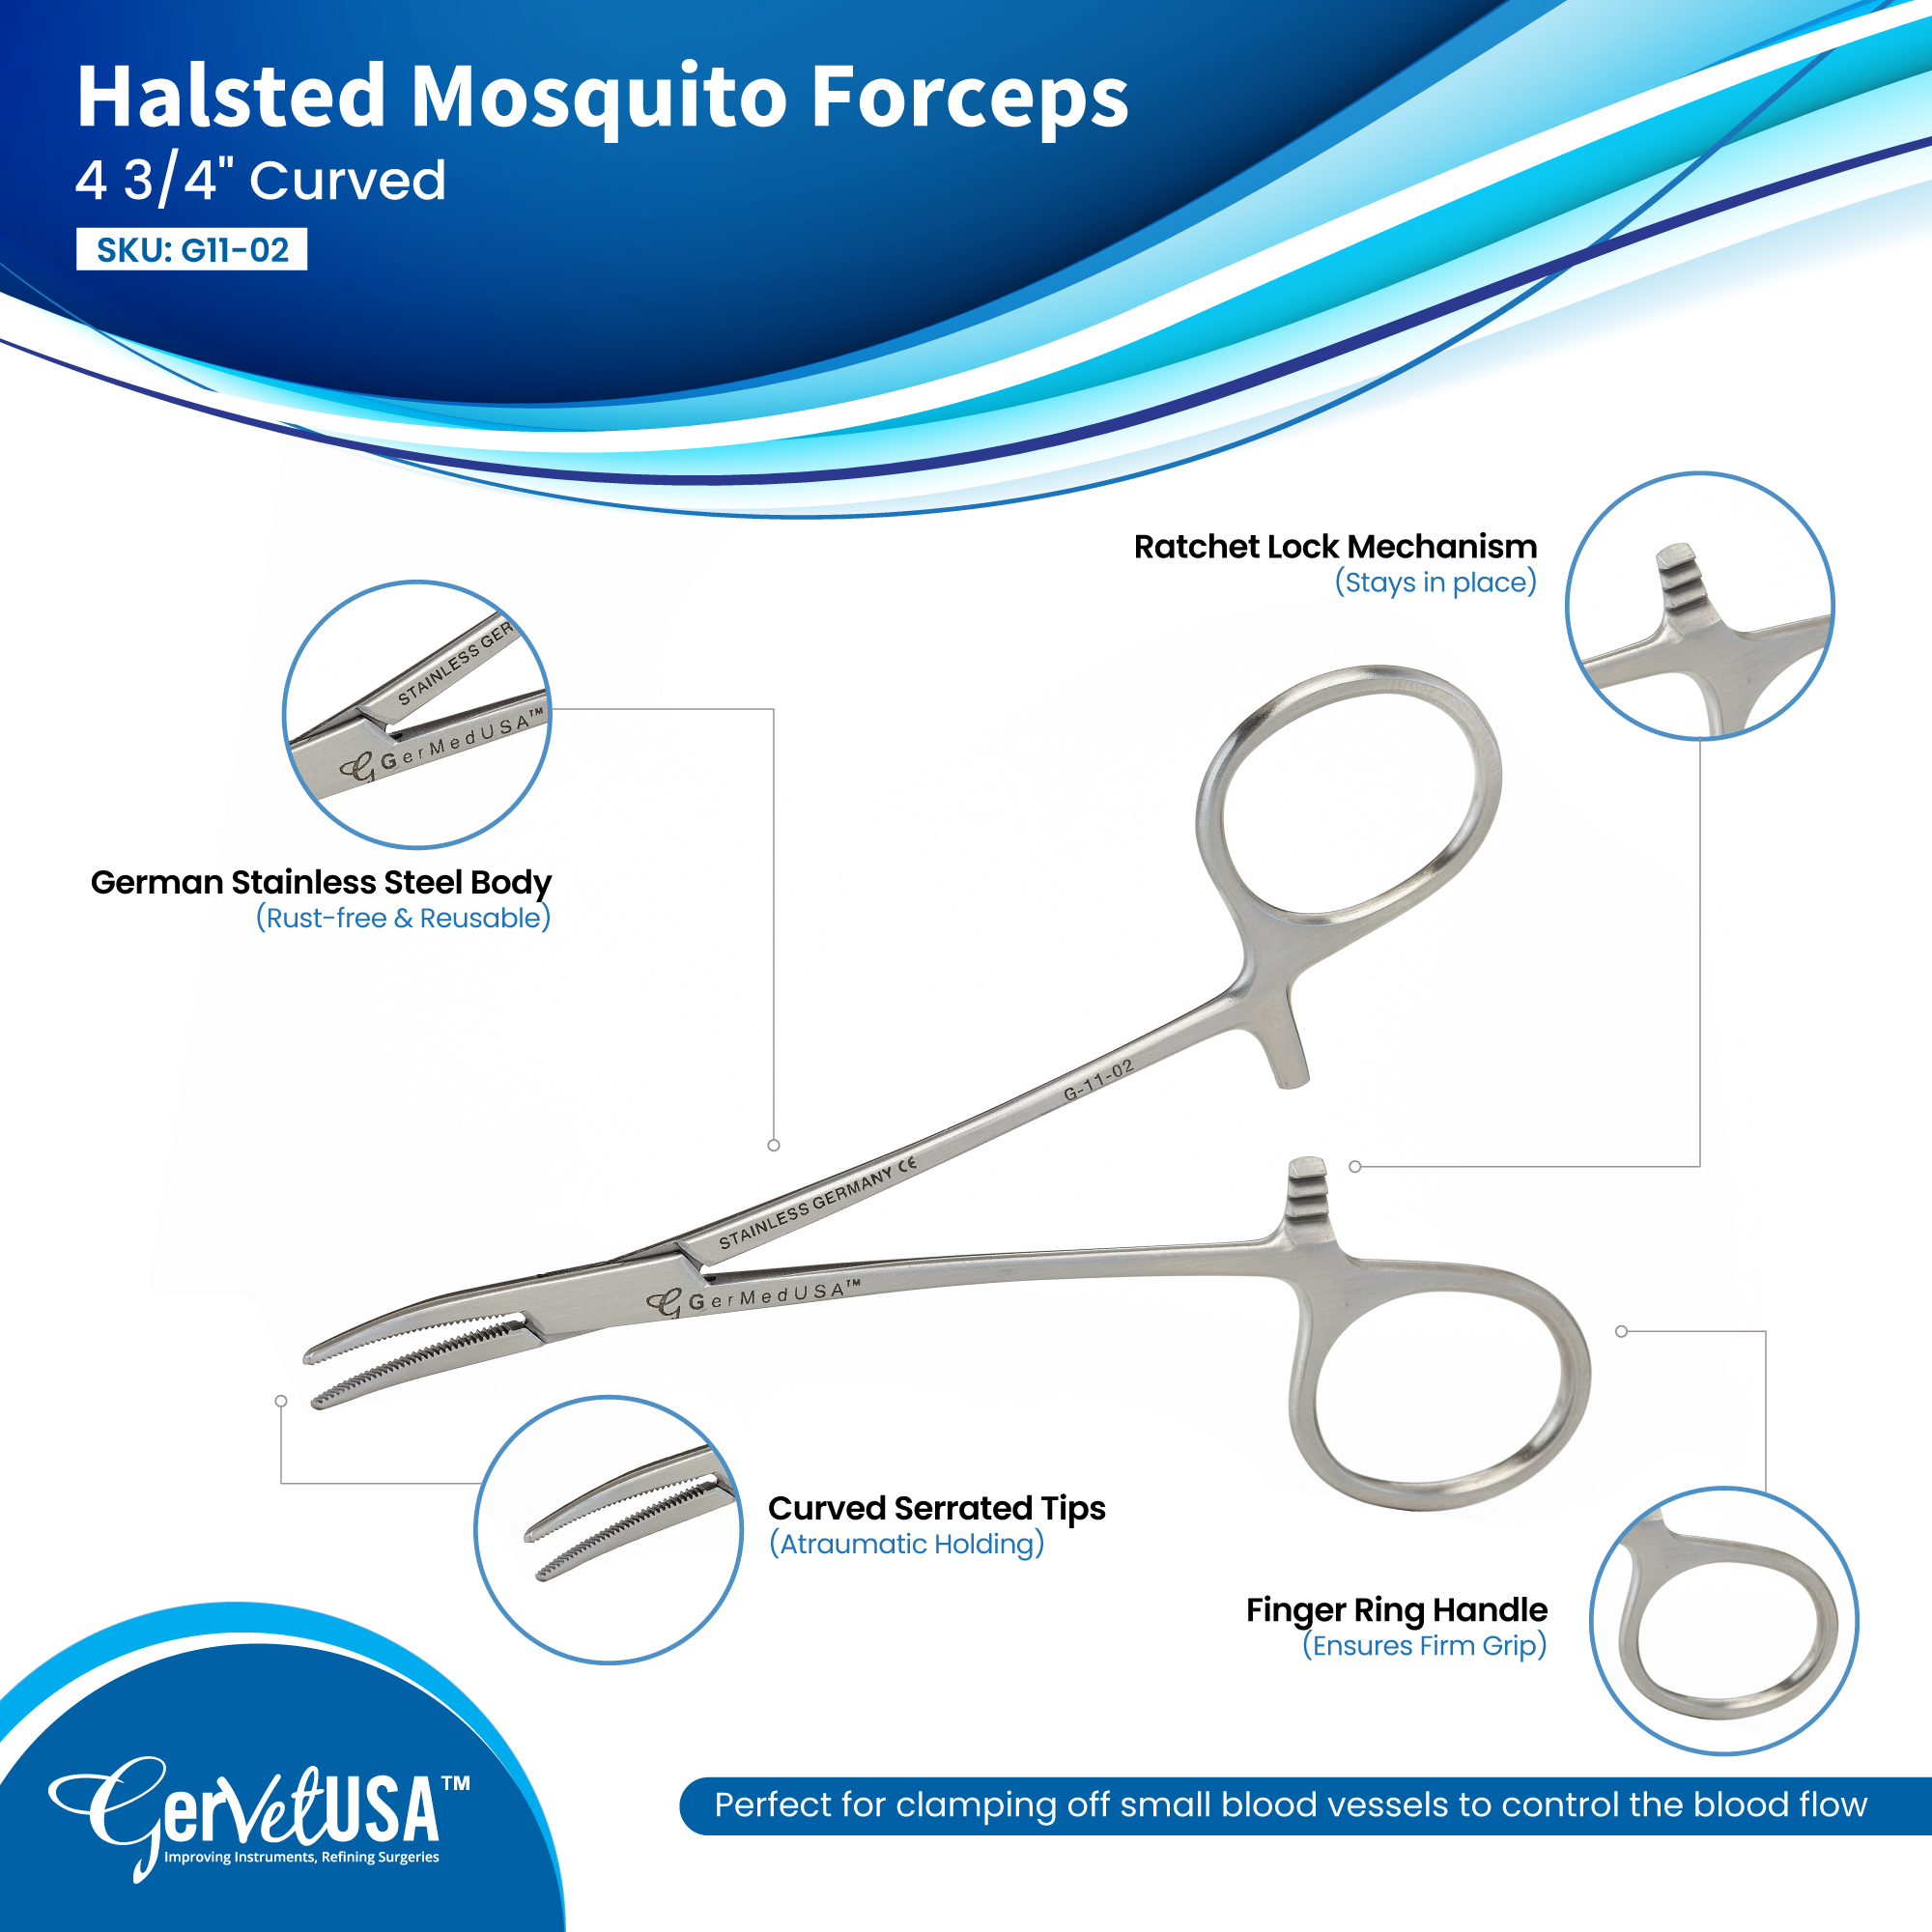 Halsted Mosquito Forceps 4 3/4" Curved